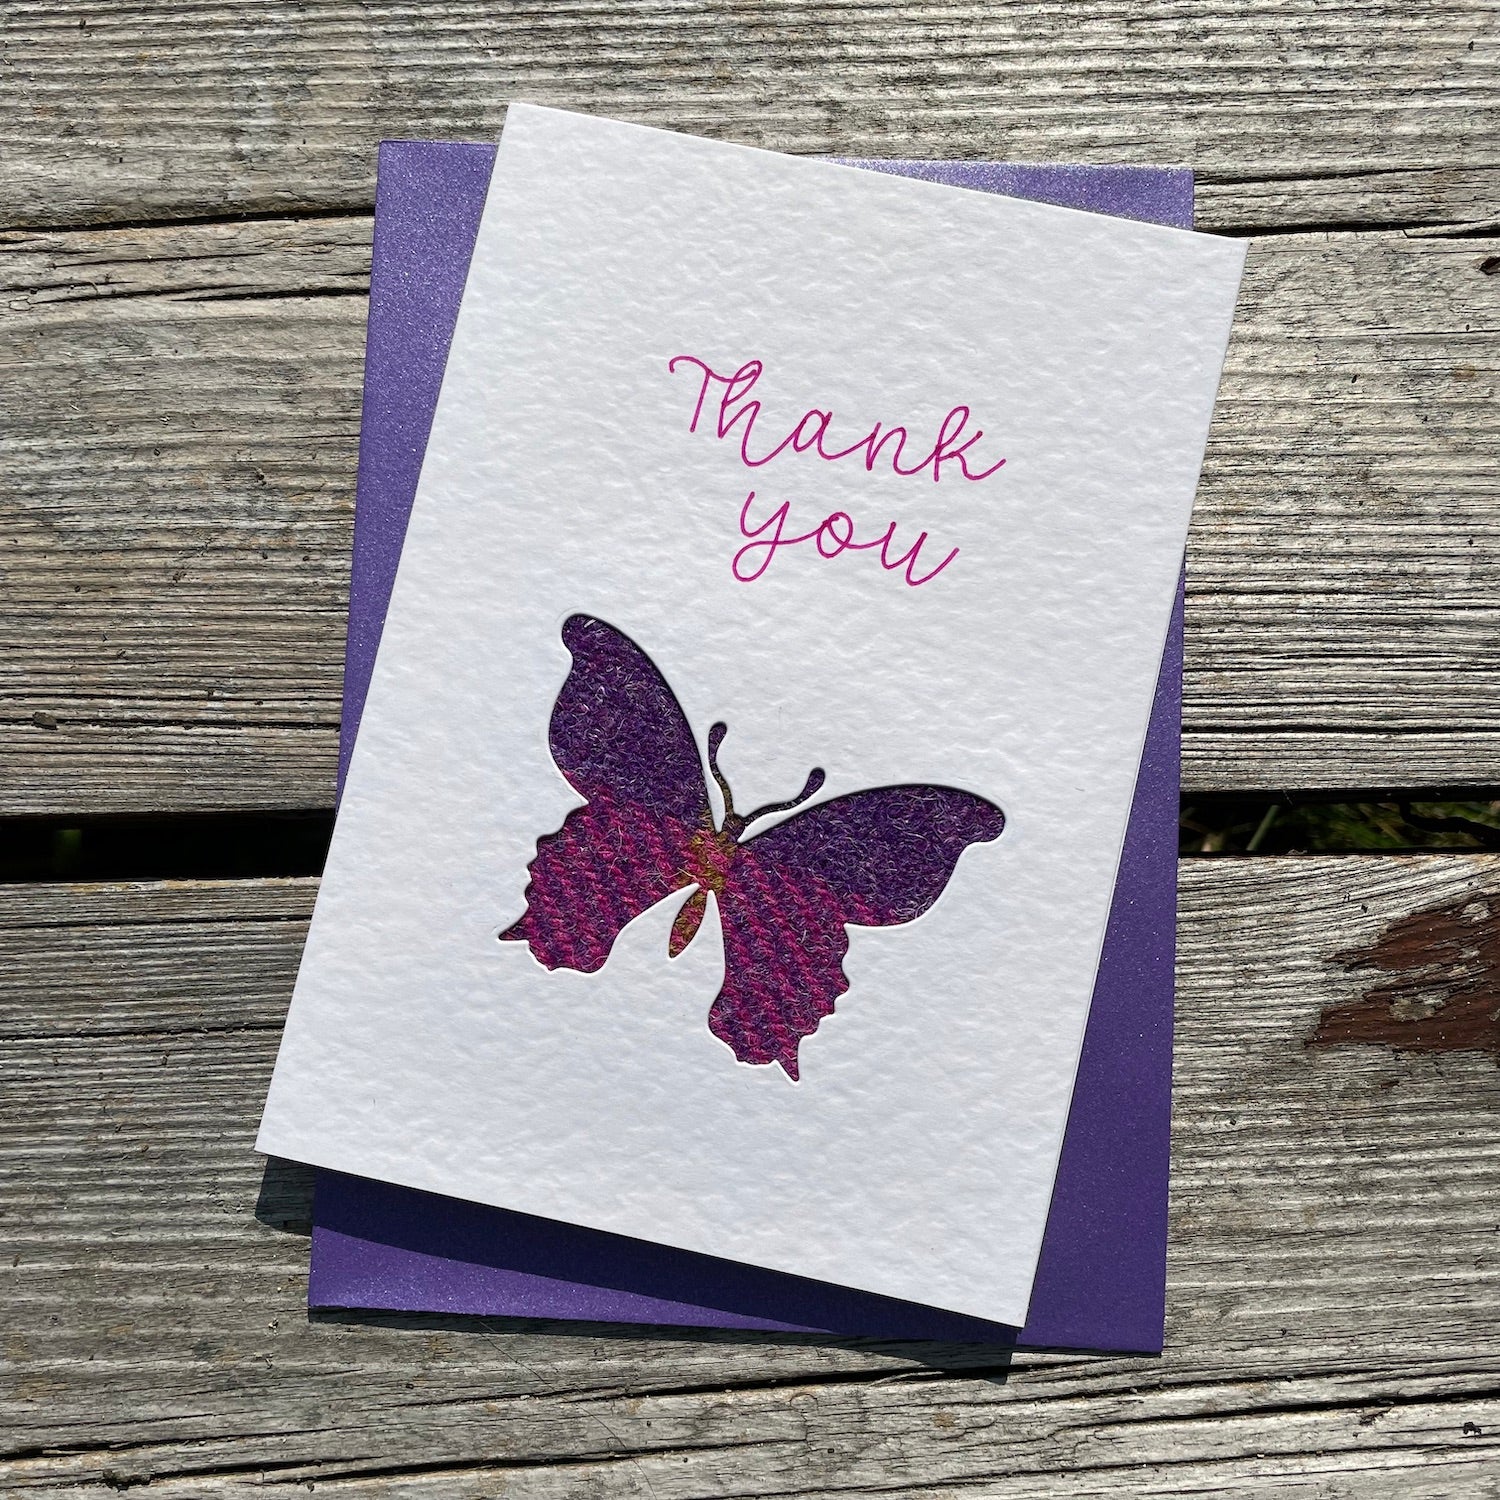 Handmade Scottish Greeting Card featuring Harris Tweed® Butterfly Thank you